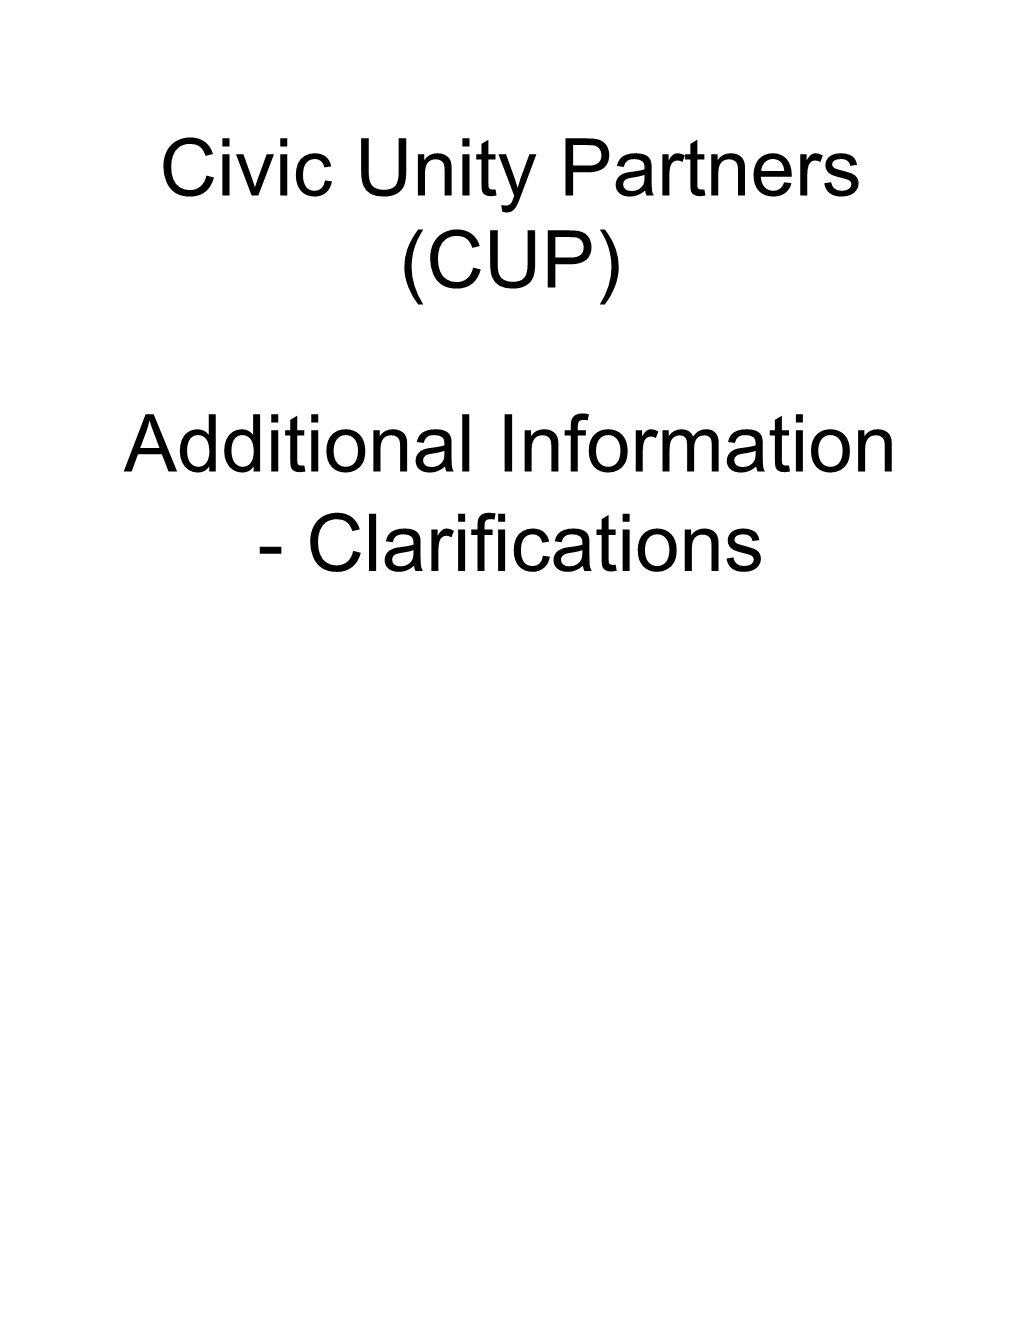 Civic Unity Partners (CUP) Additional Information